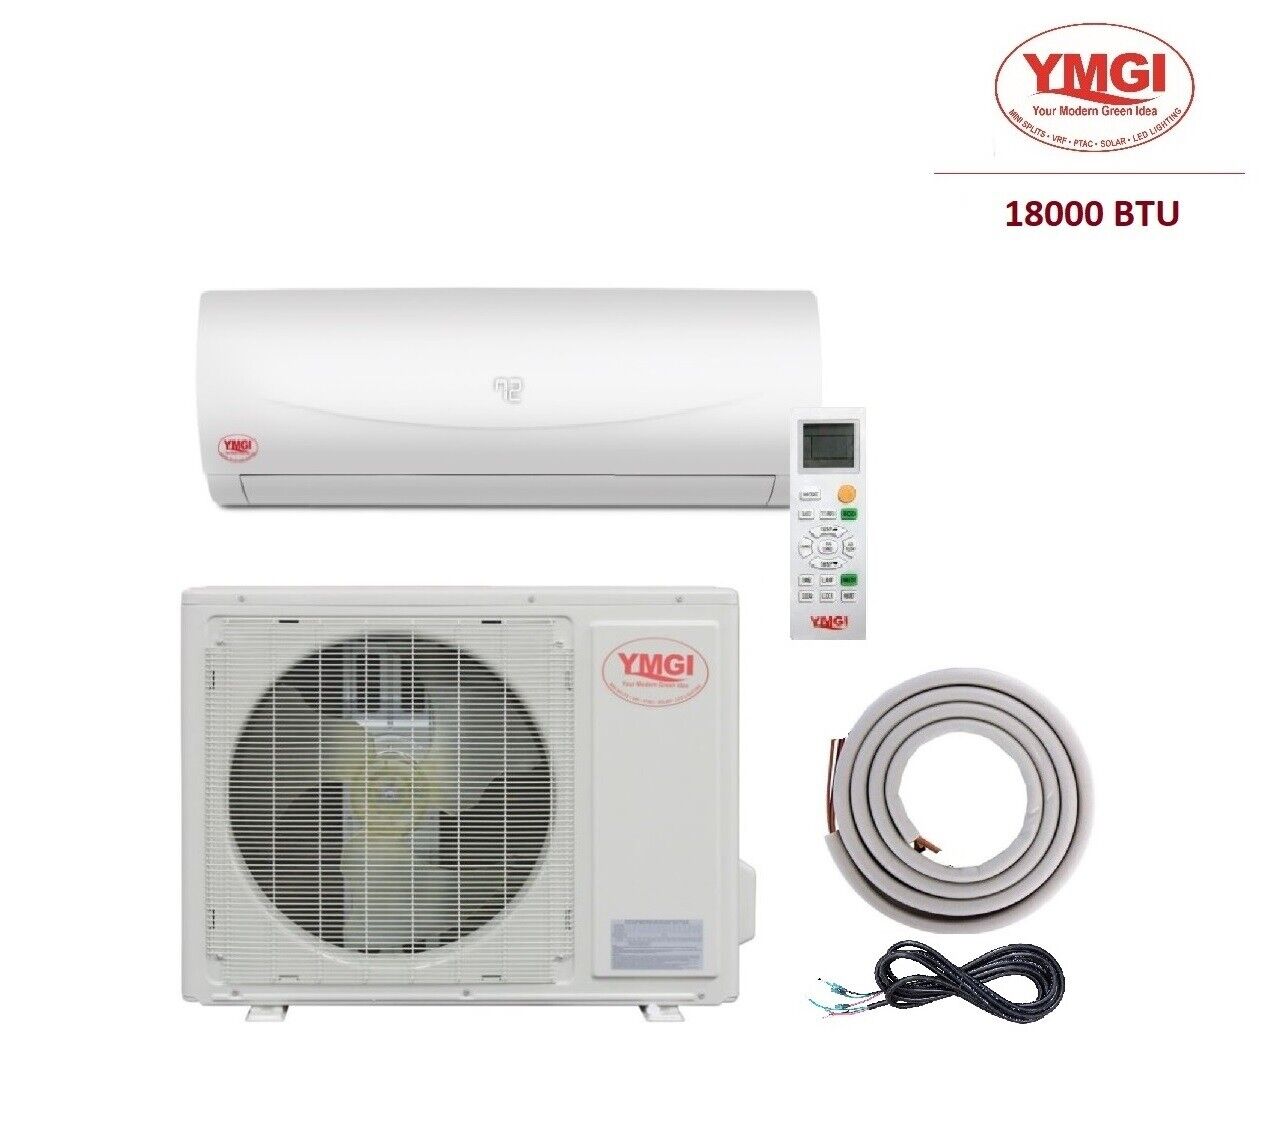 YMGI 18000 BTU  Ductless Mini Split Air conditioner with Heat Pump Heat and Cool